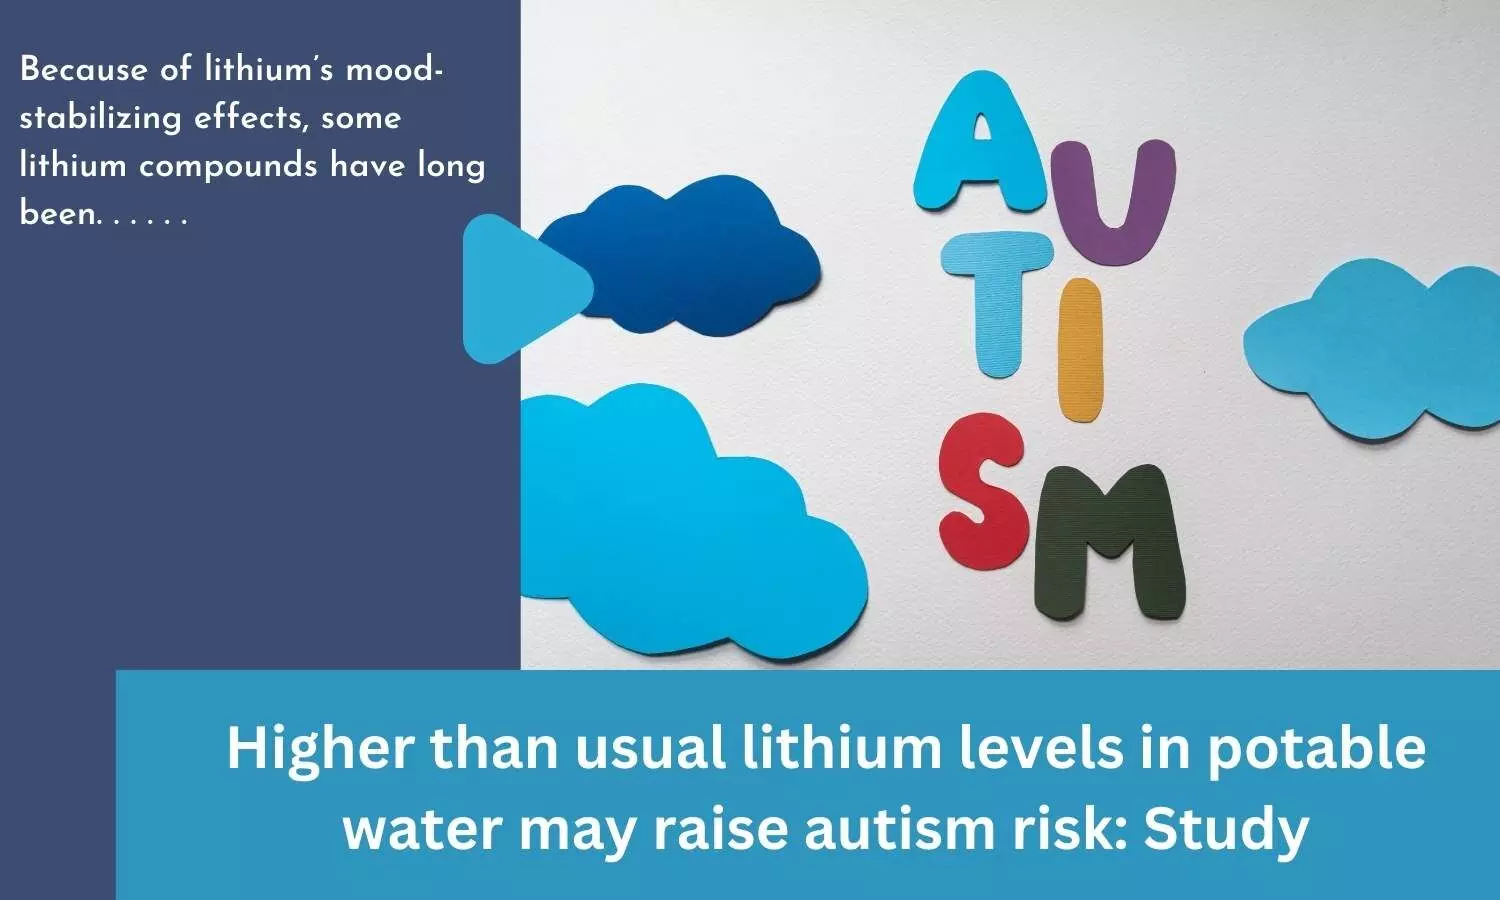 Higher than usual lithium levels in potable water may raise autism risk: Study